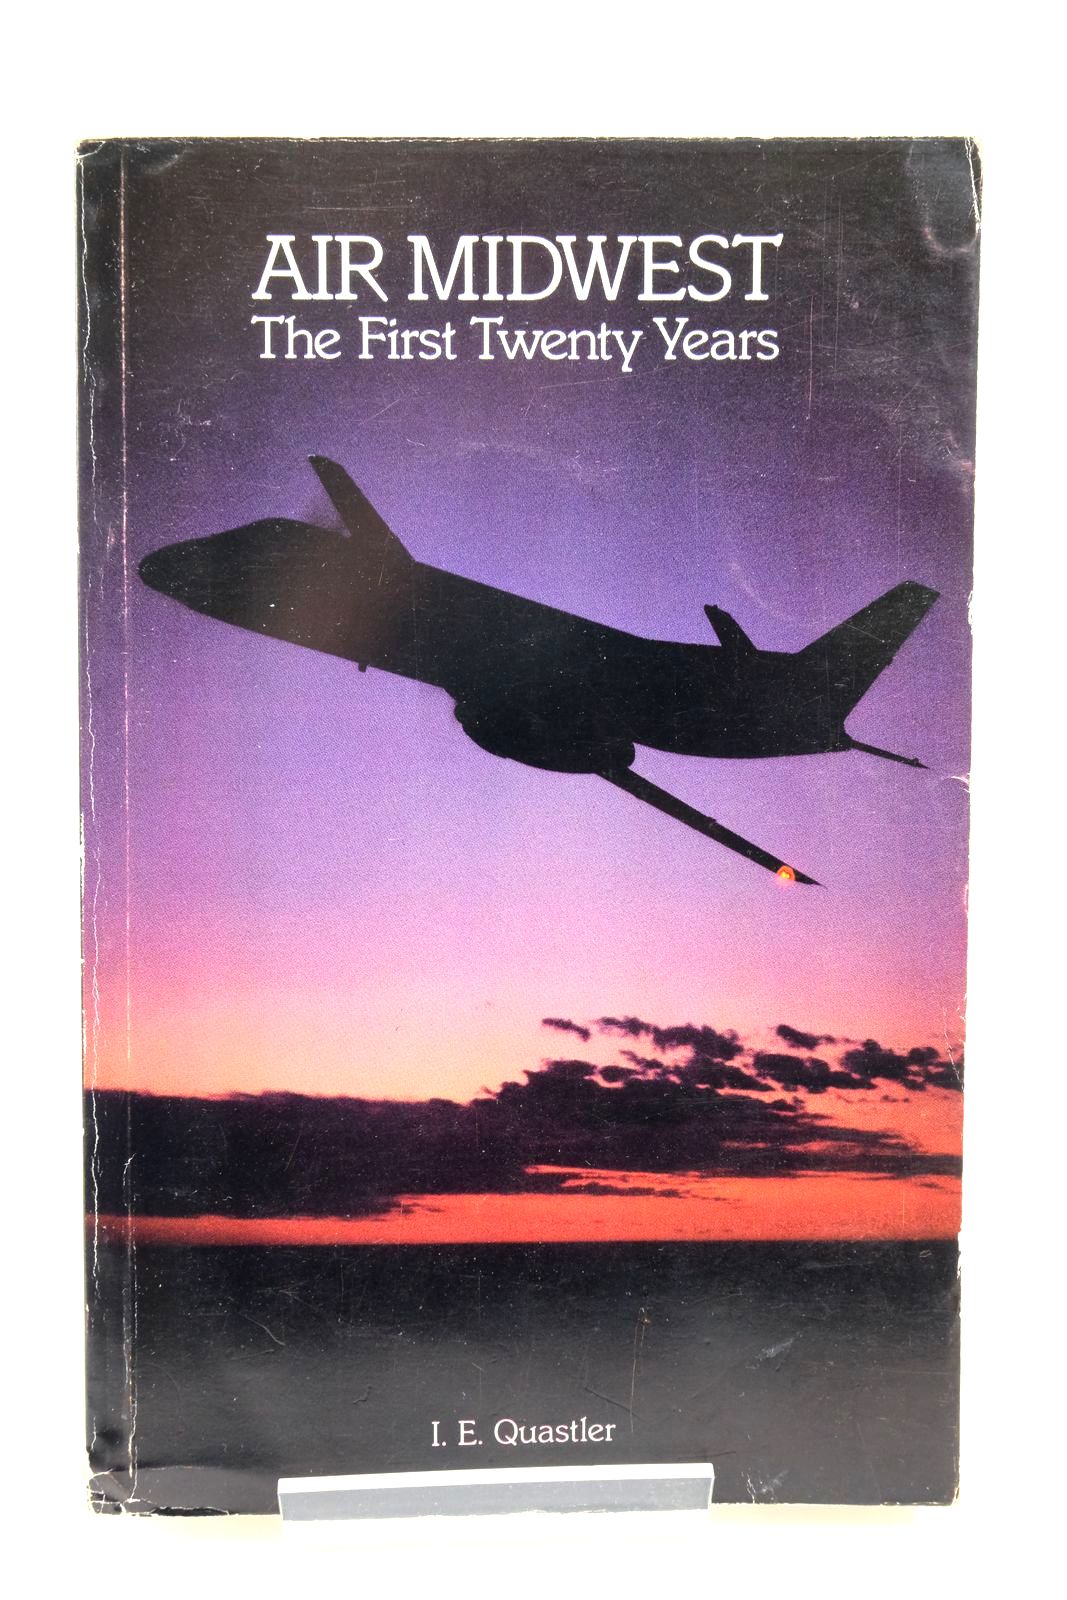 Photo of AIR MIDWEST: THE FIRST TWENTY YEARS written by Quastler, I.E. published by Airline Press Of California (STOCK CODE: 2138434)  for sale by Stella & Rose's Books